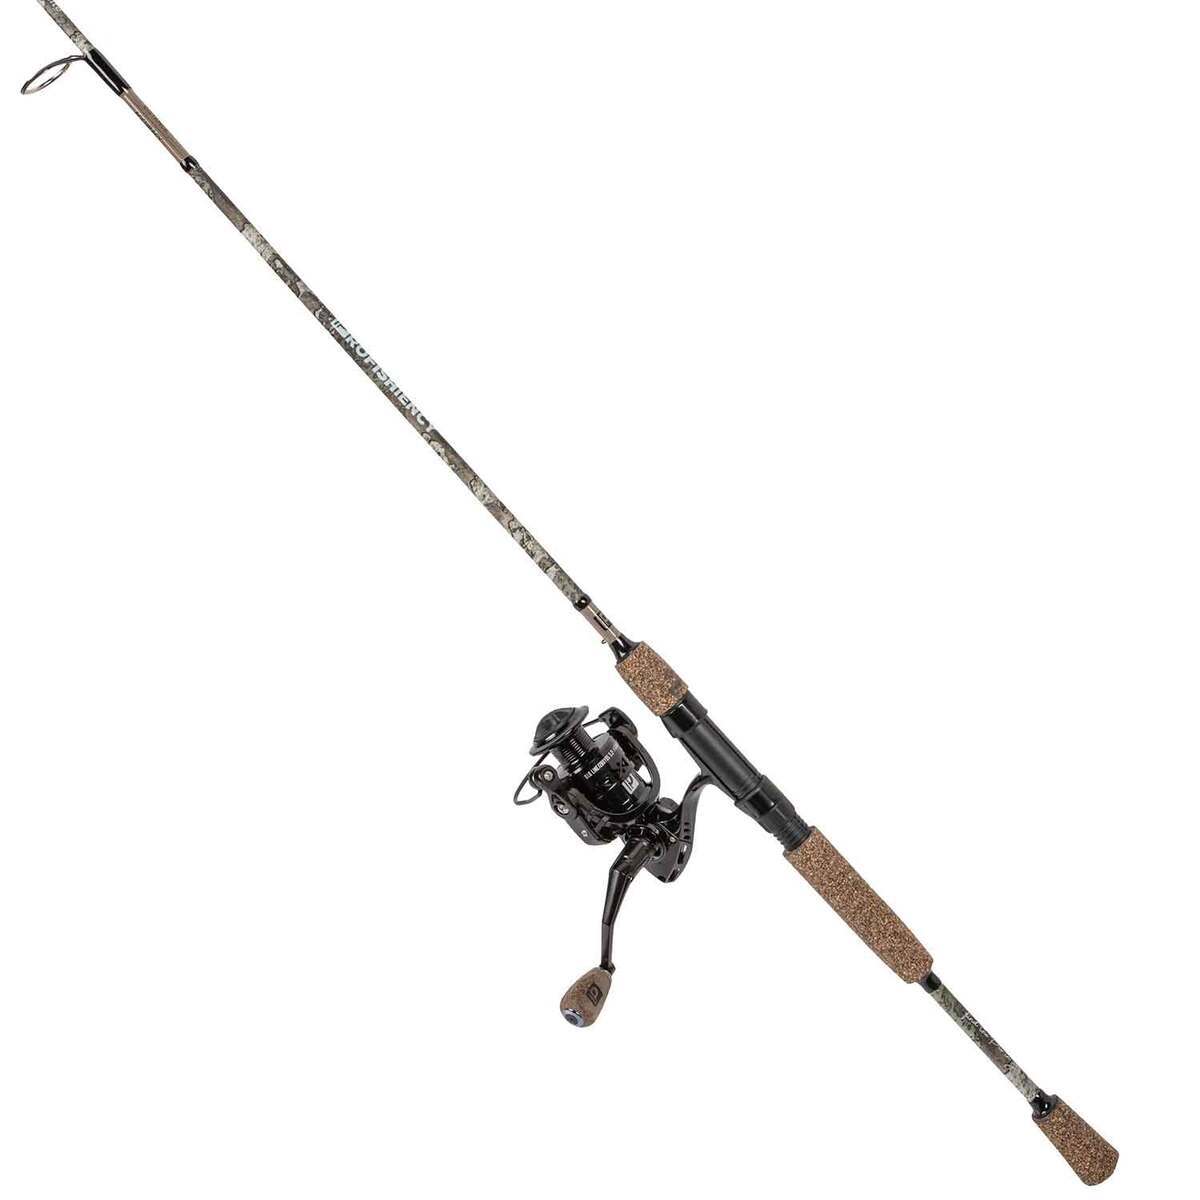 Coarse Fishing Tackle, Rods, Reels, Poles